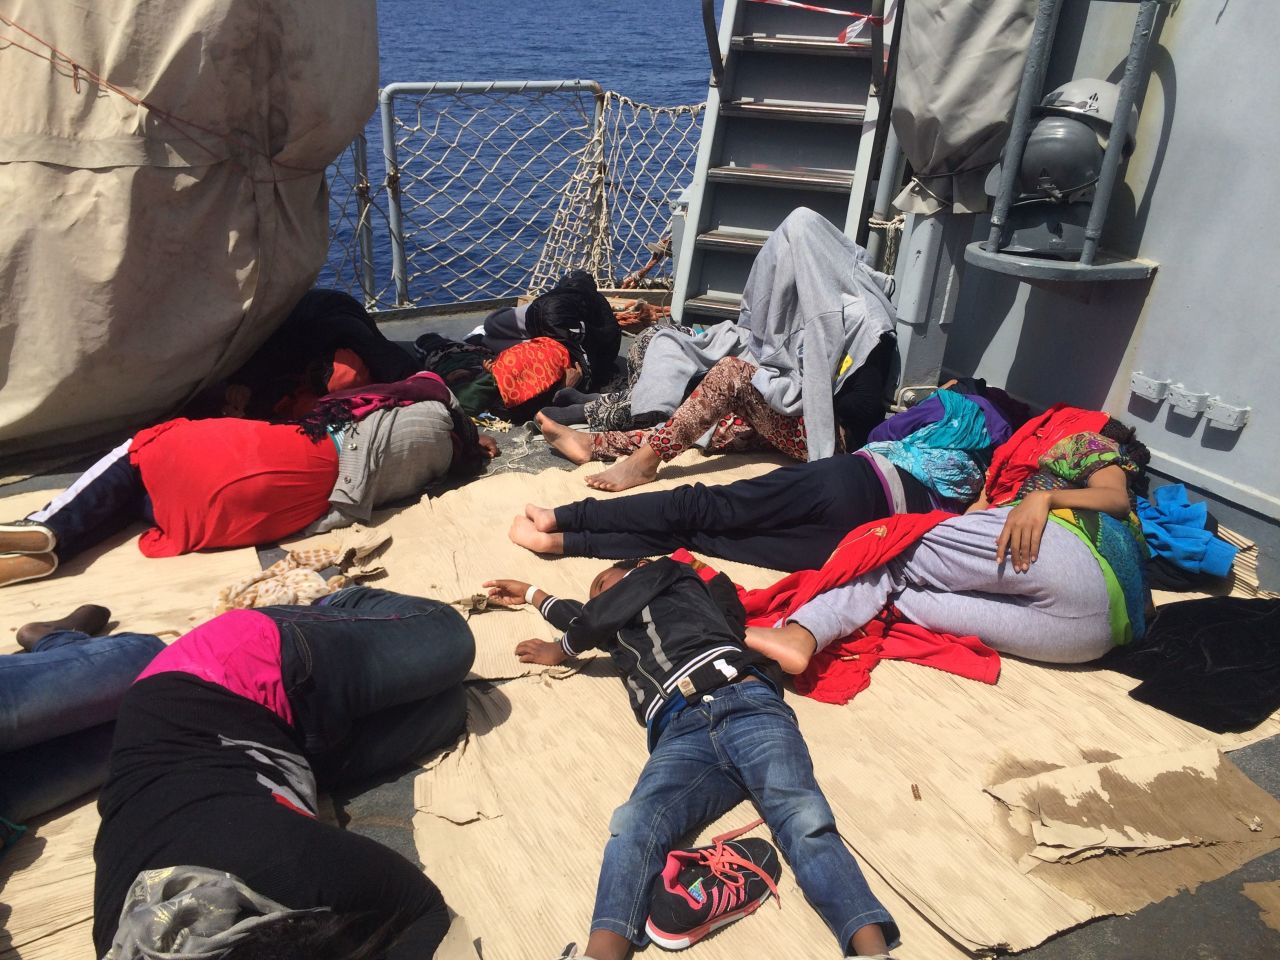 A sigh of relief: Women and children sleep on the deck of the Sfinge, an Italian Minerva-class warship -- "sfinge" is Italian for "sphinx" -- after being rescued.<br /><br />Producer Dominique van Heerden took these photos after the CNN team helicoptered in from the Italian island of Lampedusa.